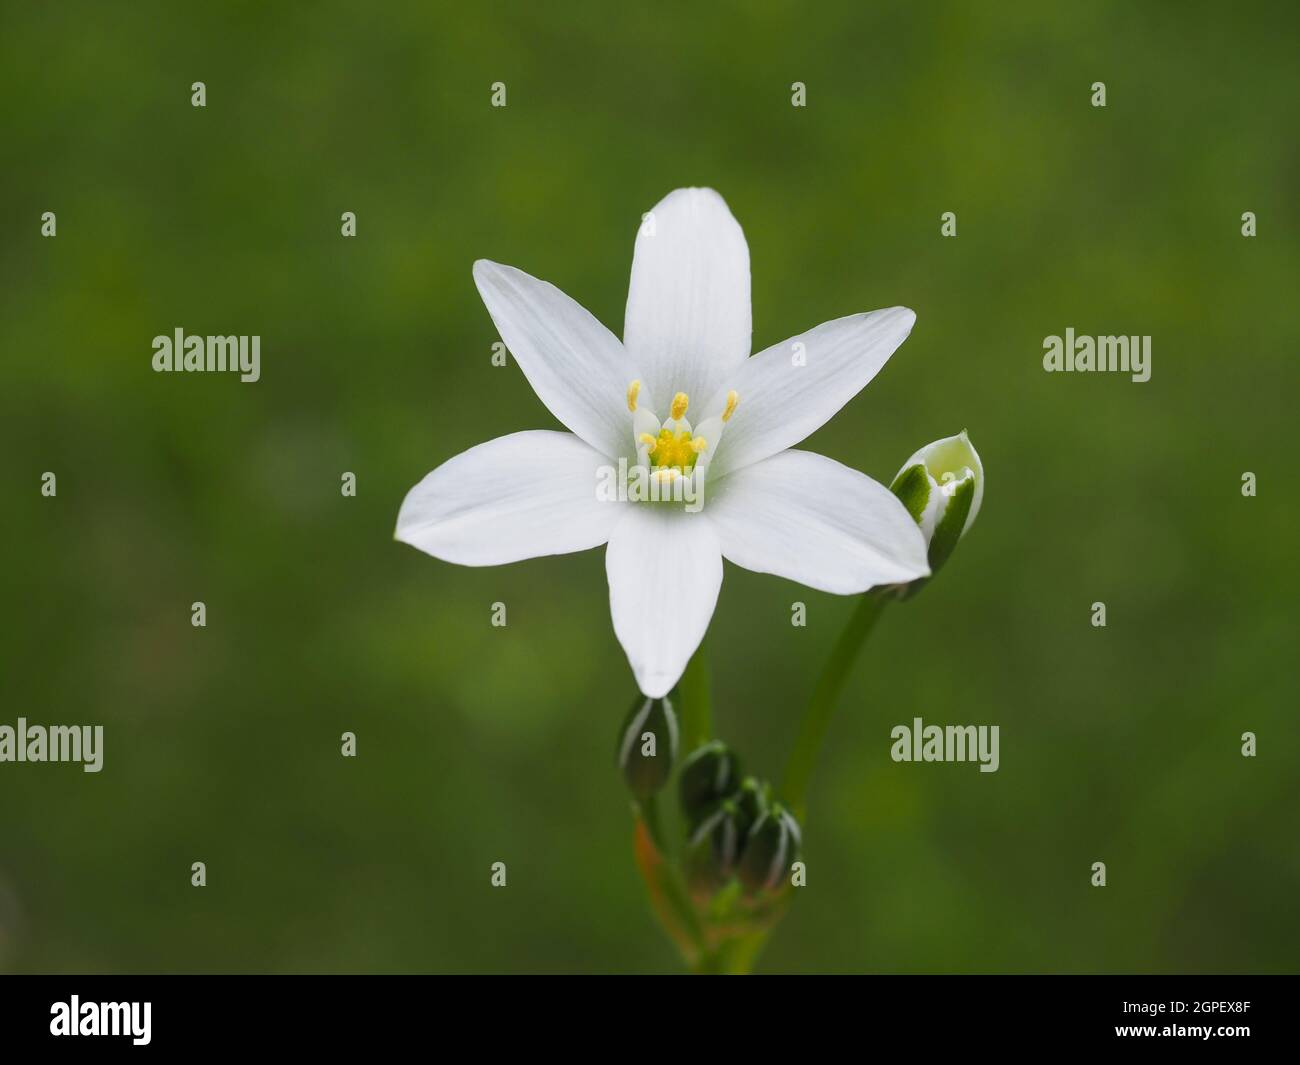 Ornithogalum umbellatum, white star-shaped flower, close up. Common name Star-of-Bethlehem, flowering plant in the family Asparagaceae, Scilloideae. Stock Photo